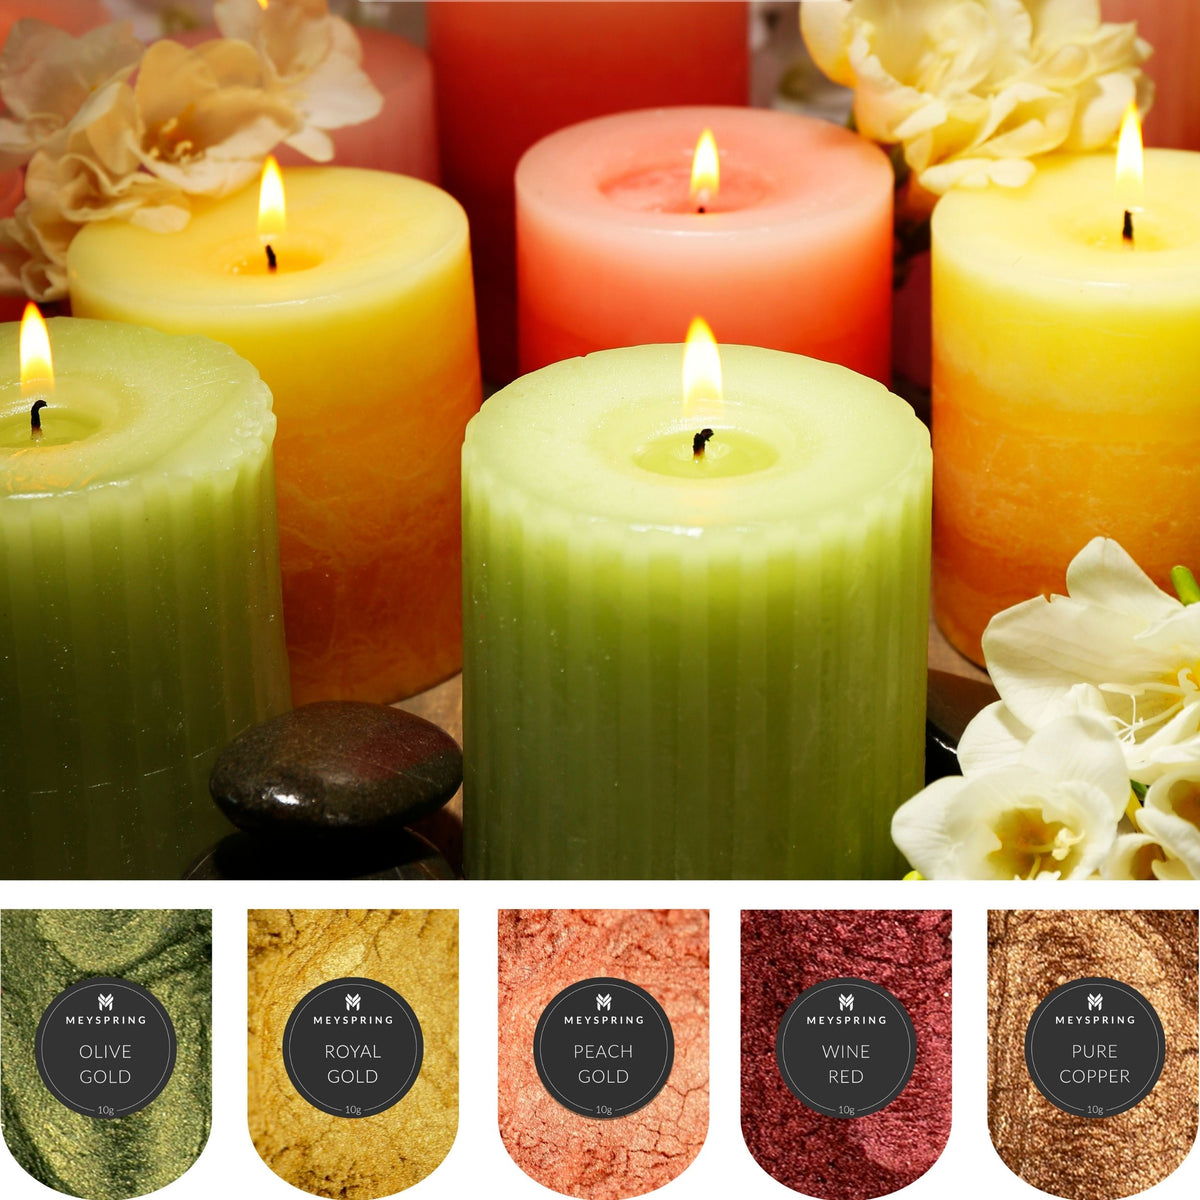 Mother-of-Pearl Candle, Soy Blend Wax